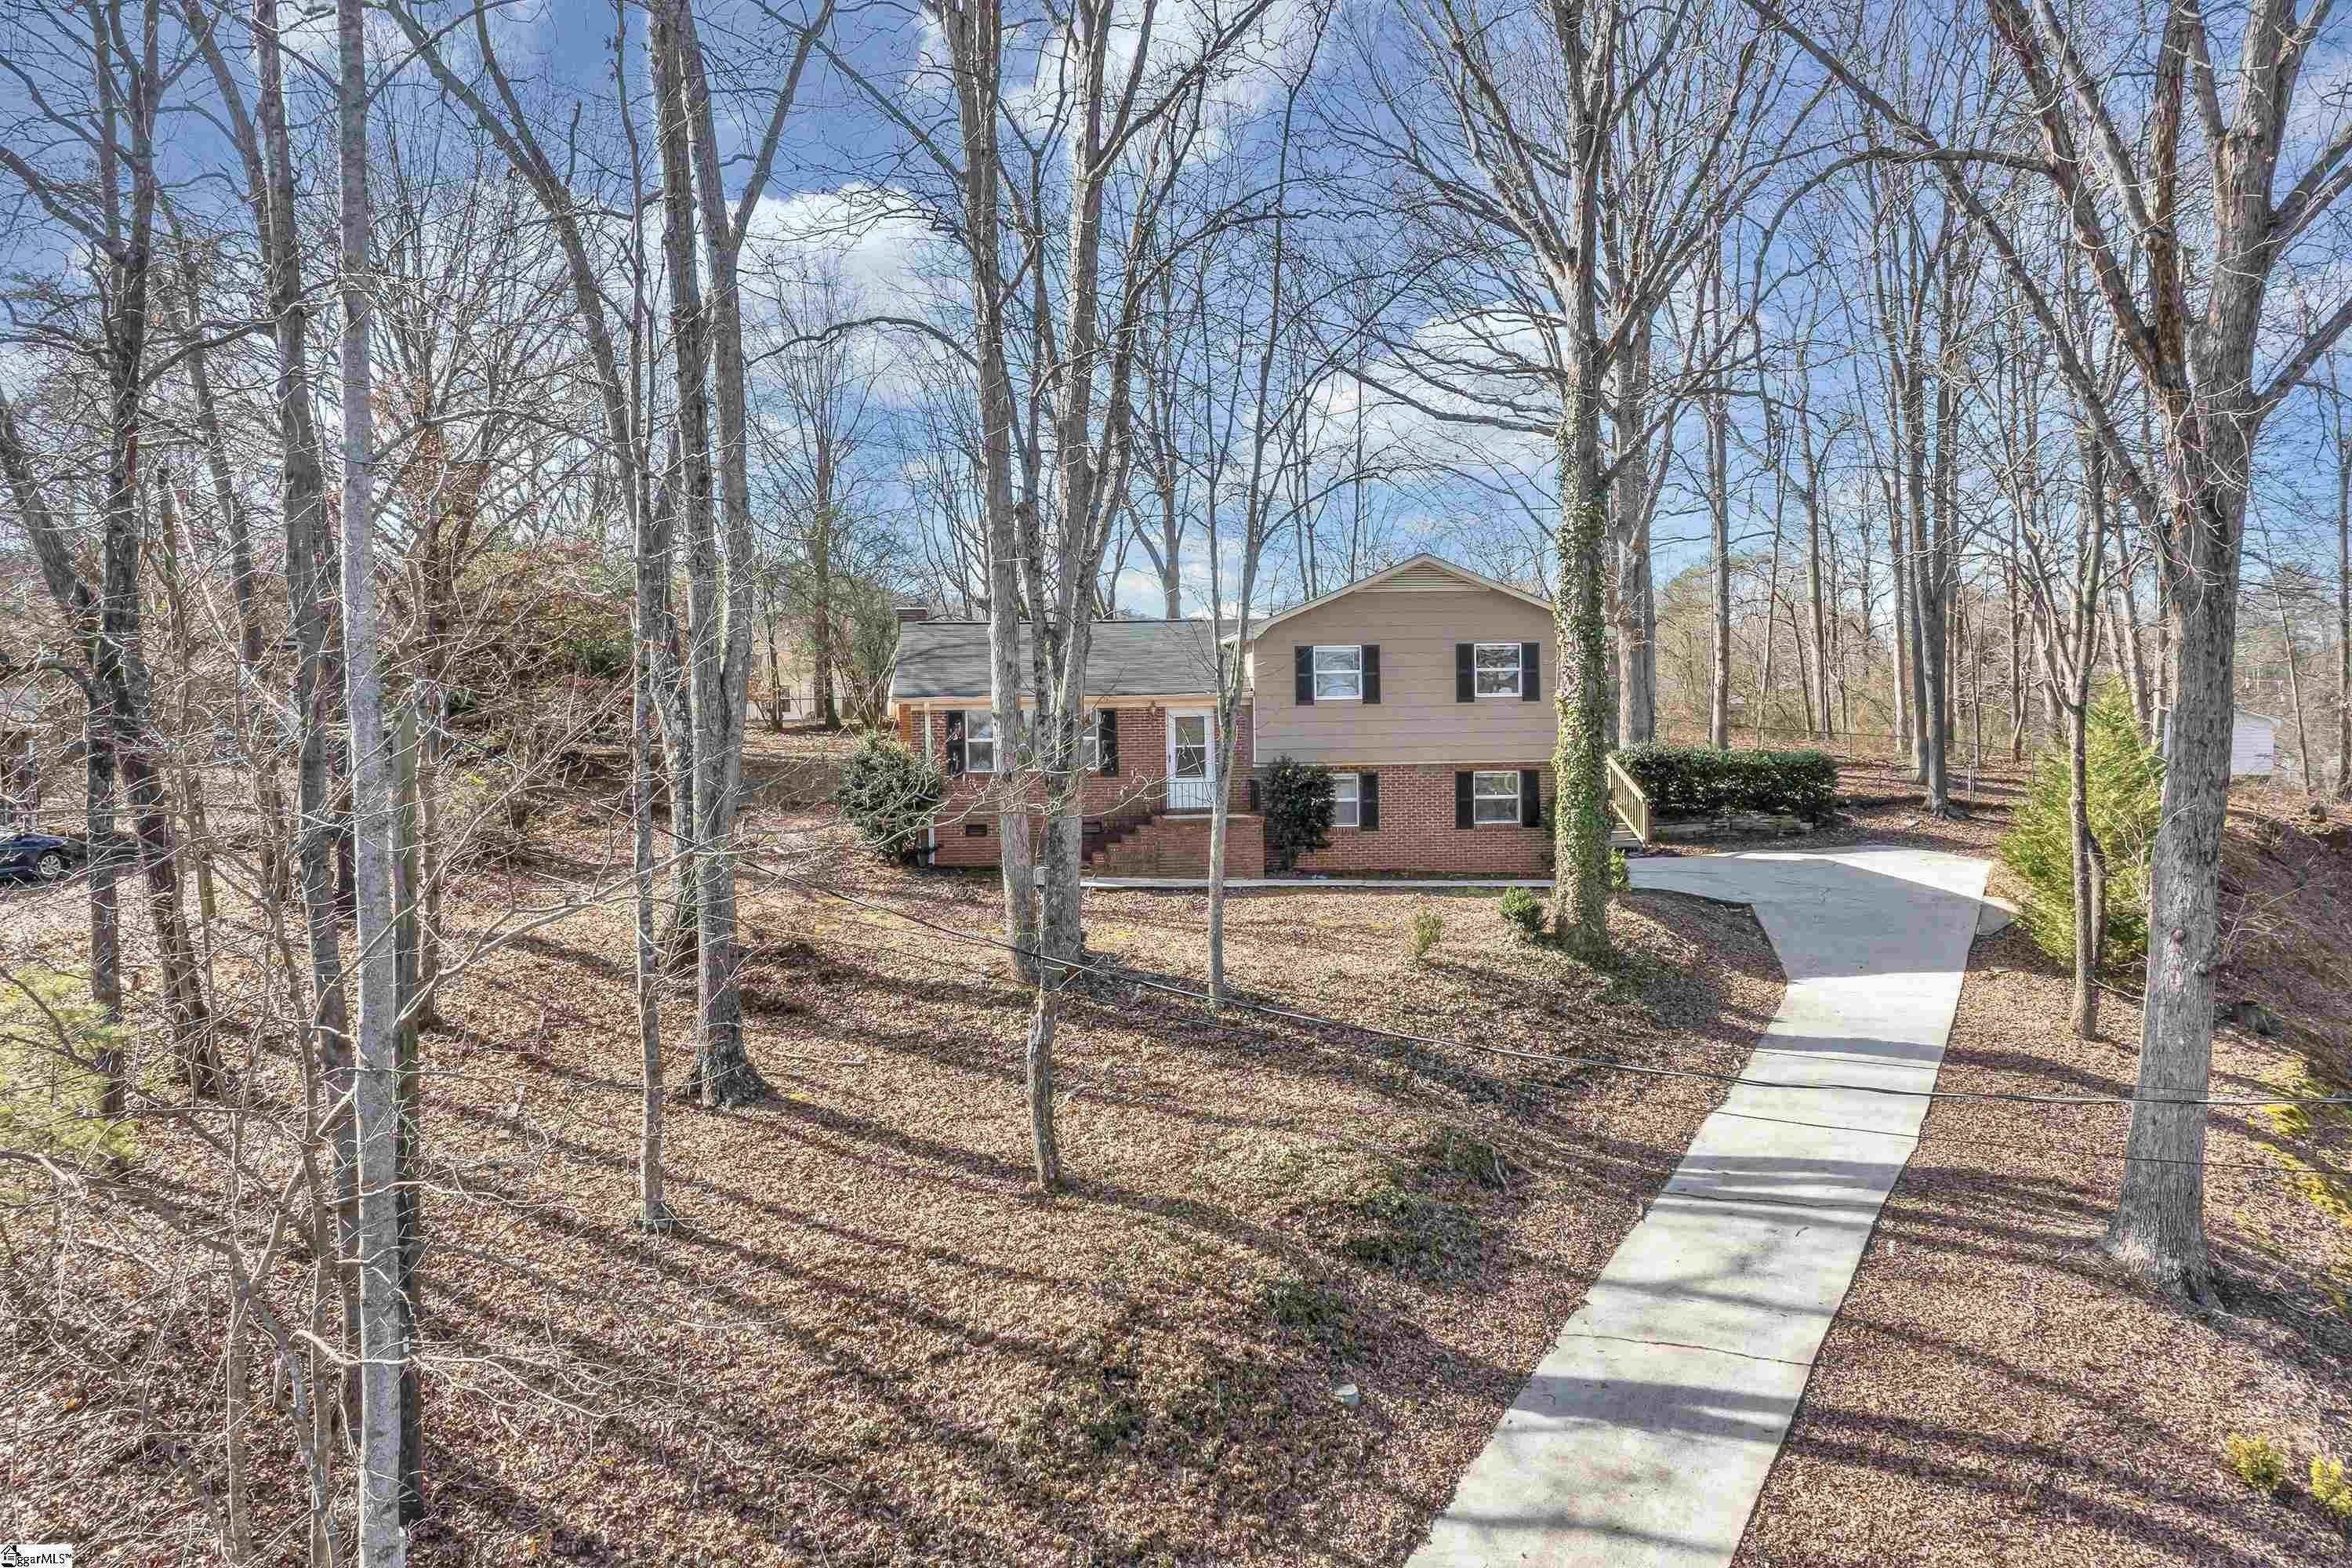 2. Single Family for Sale at Greenville, SC 29609